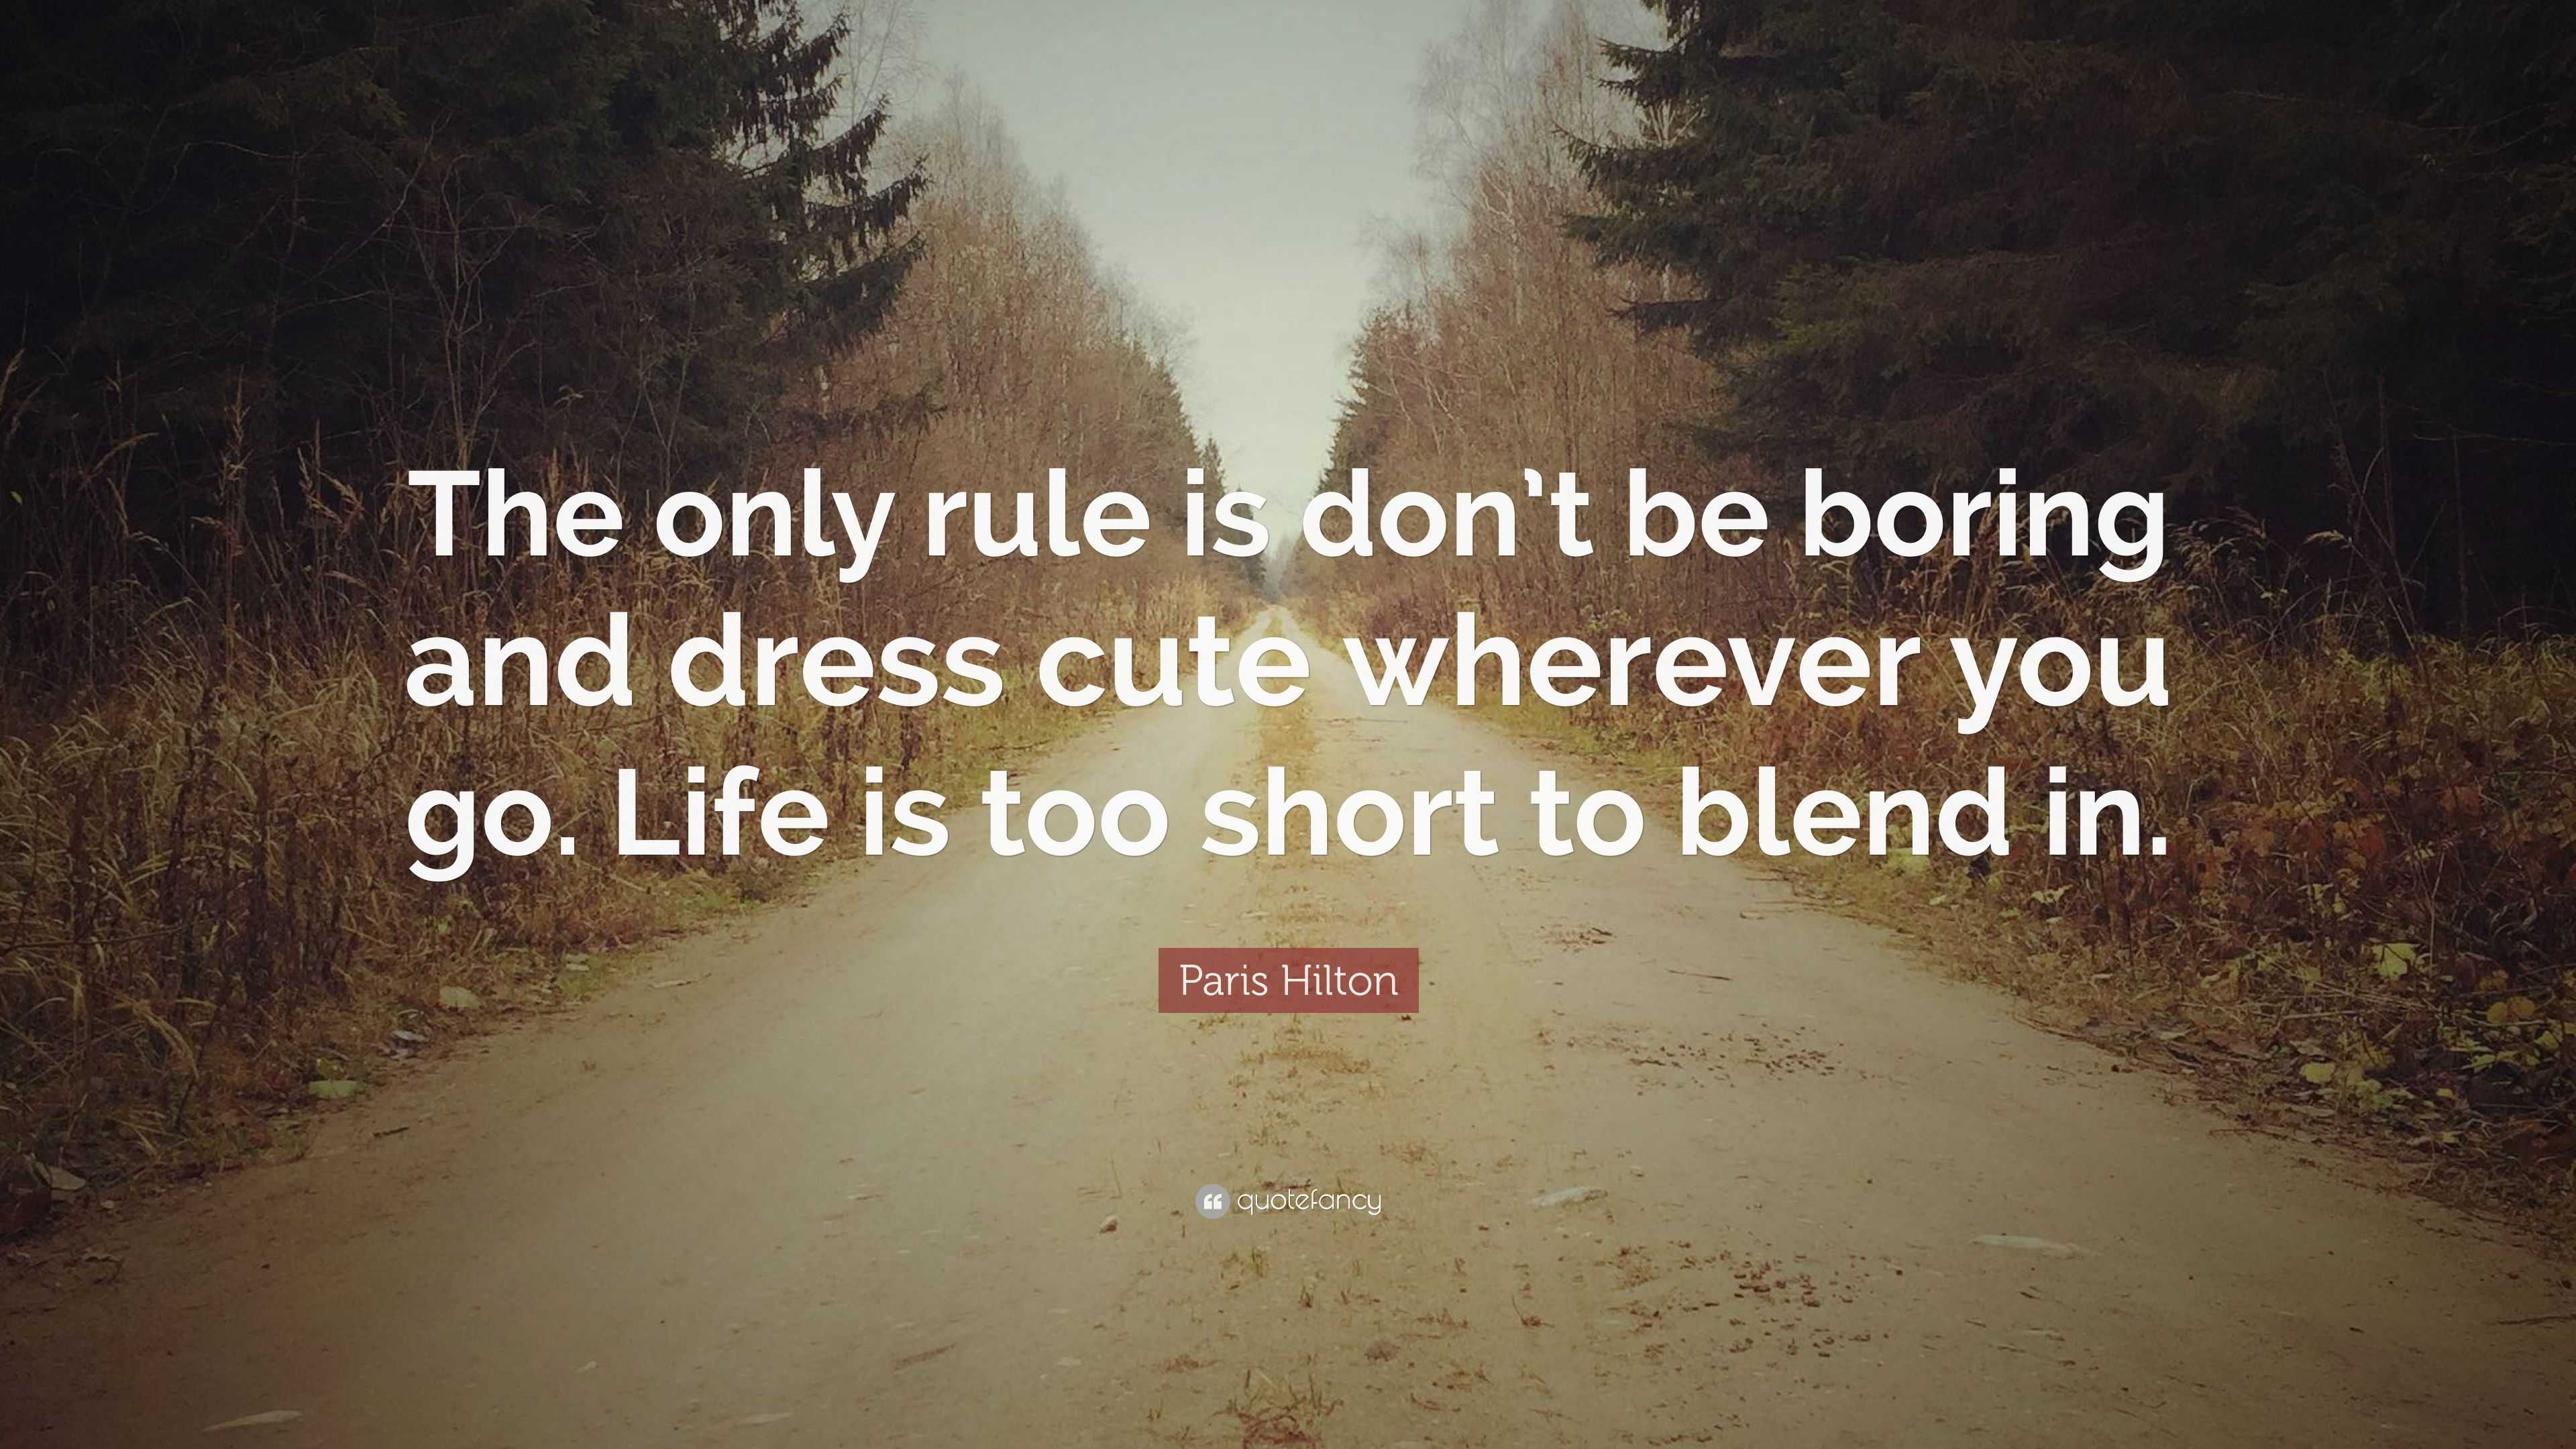 Paris Hilton Quote: “The only rule is don’t be boring and dress cute ...